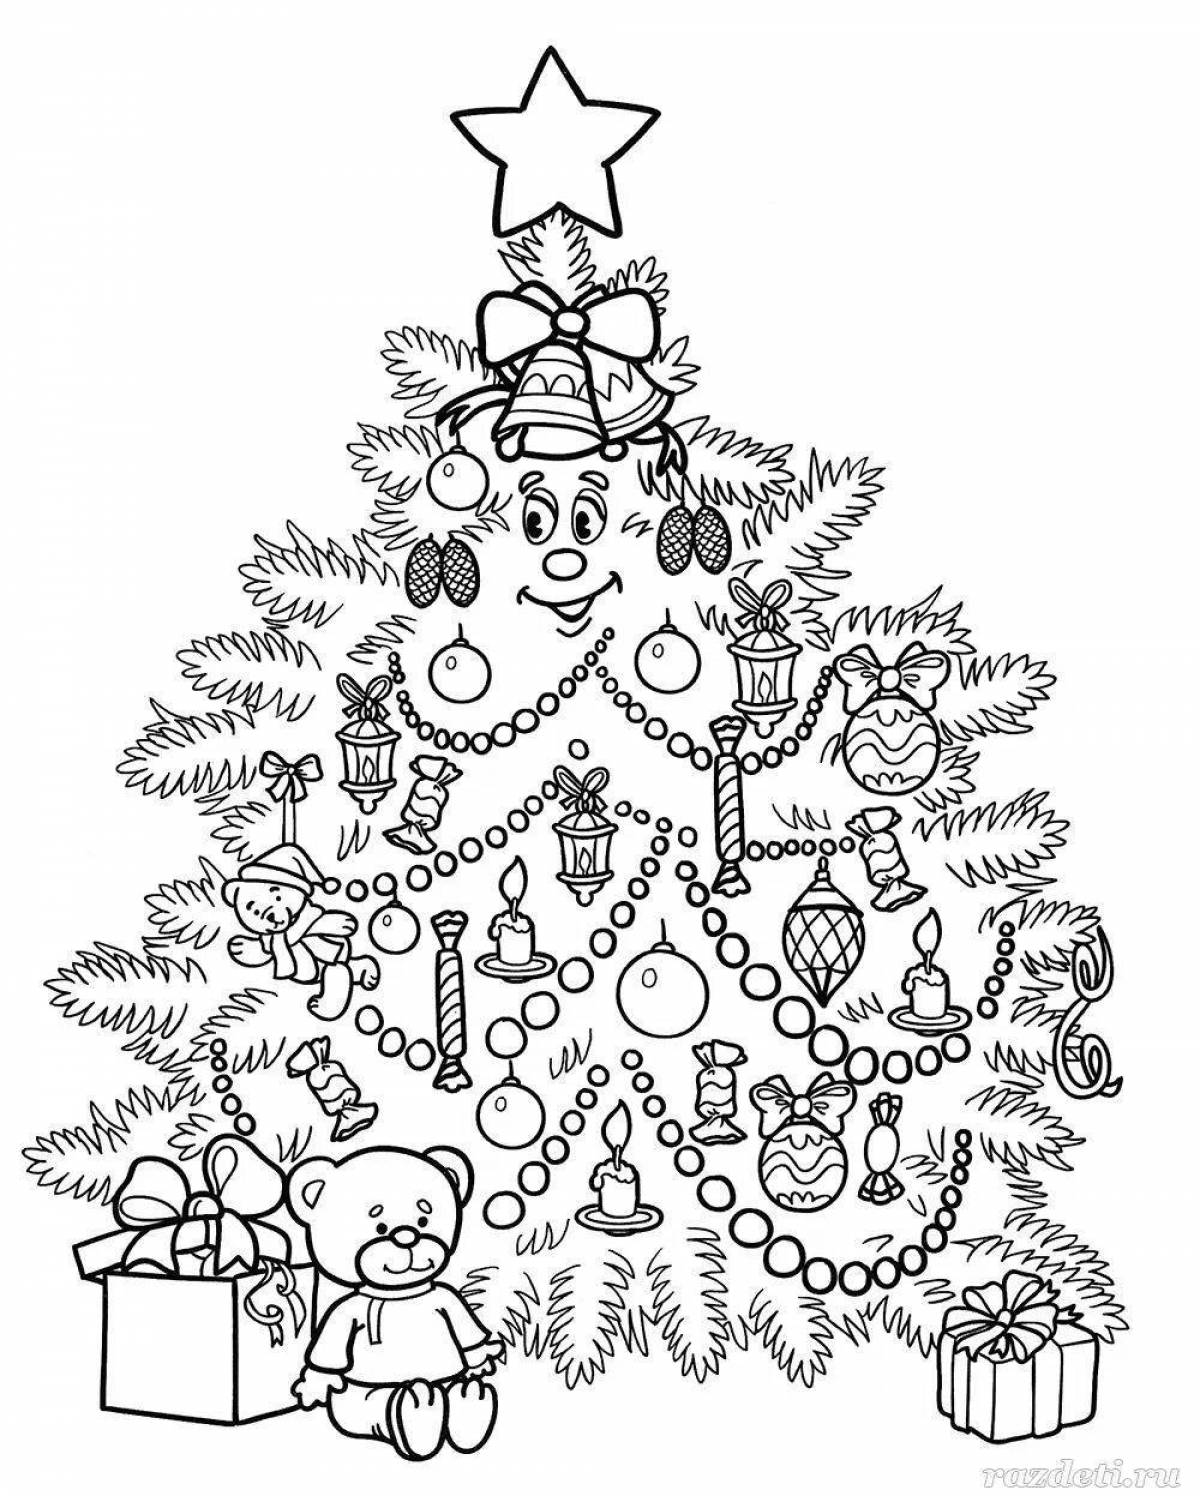 Coloring book magnificent Kremlin Christmas tree